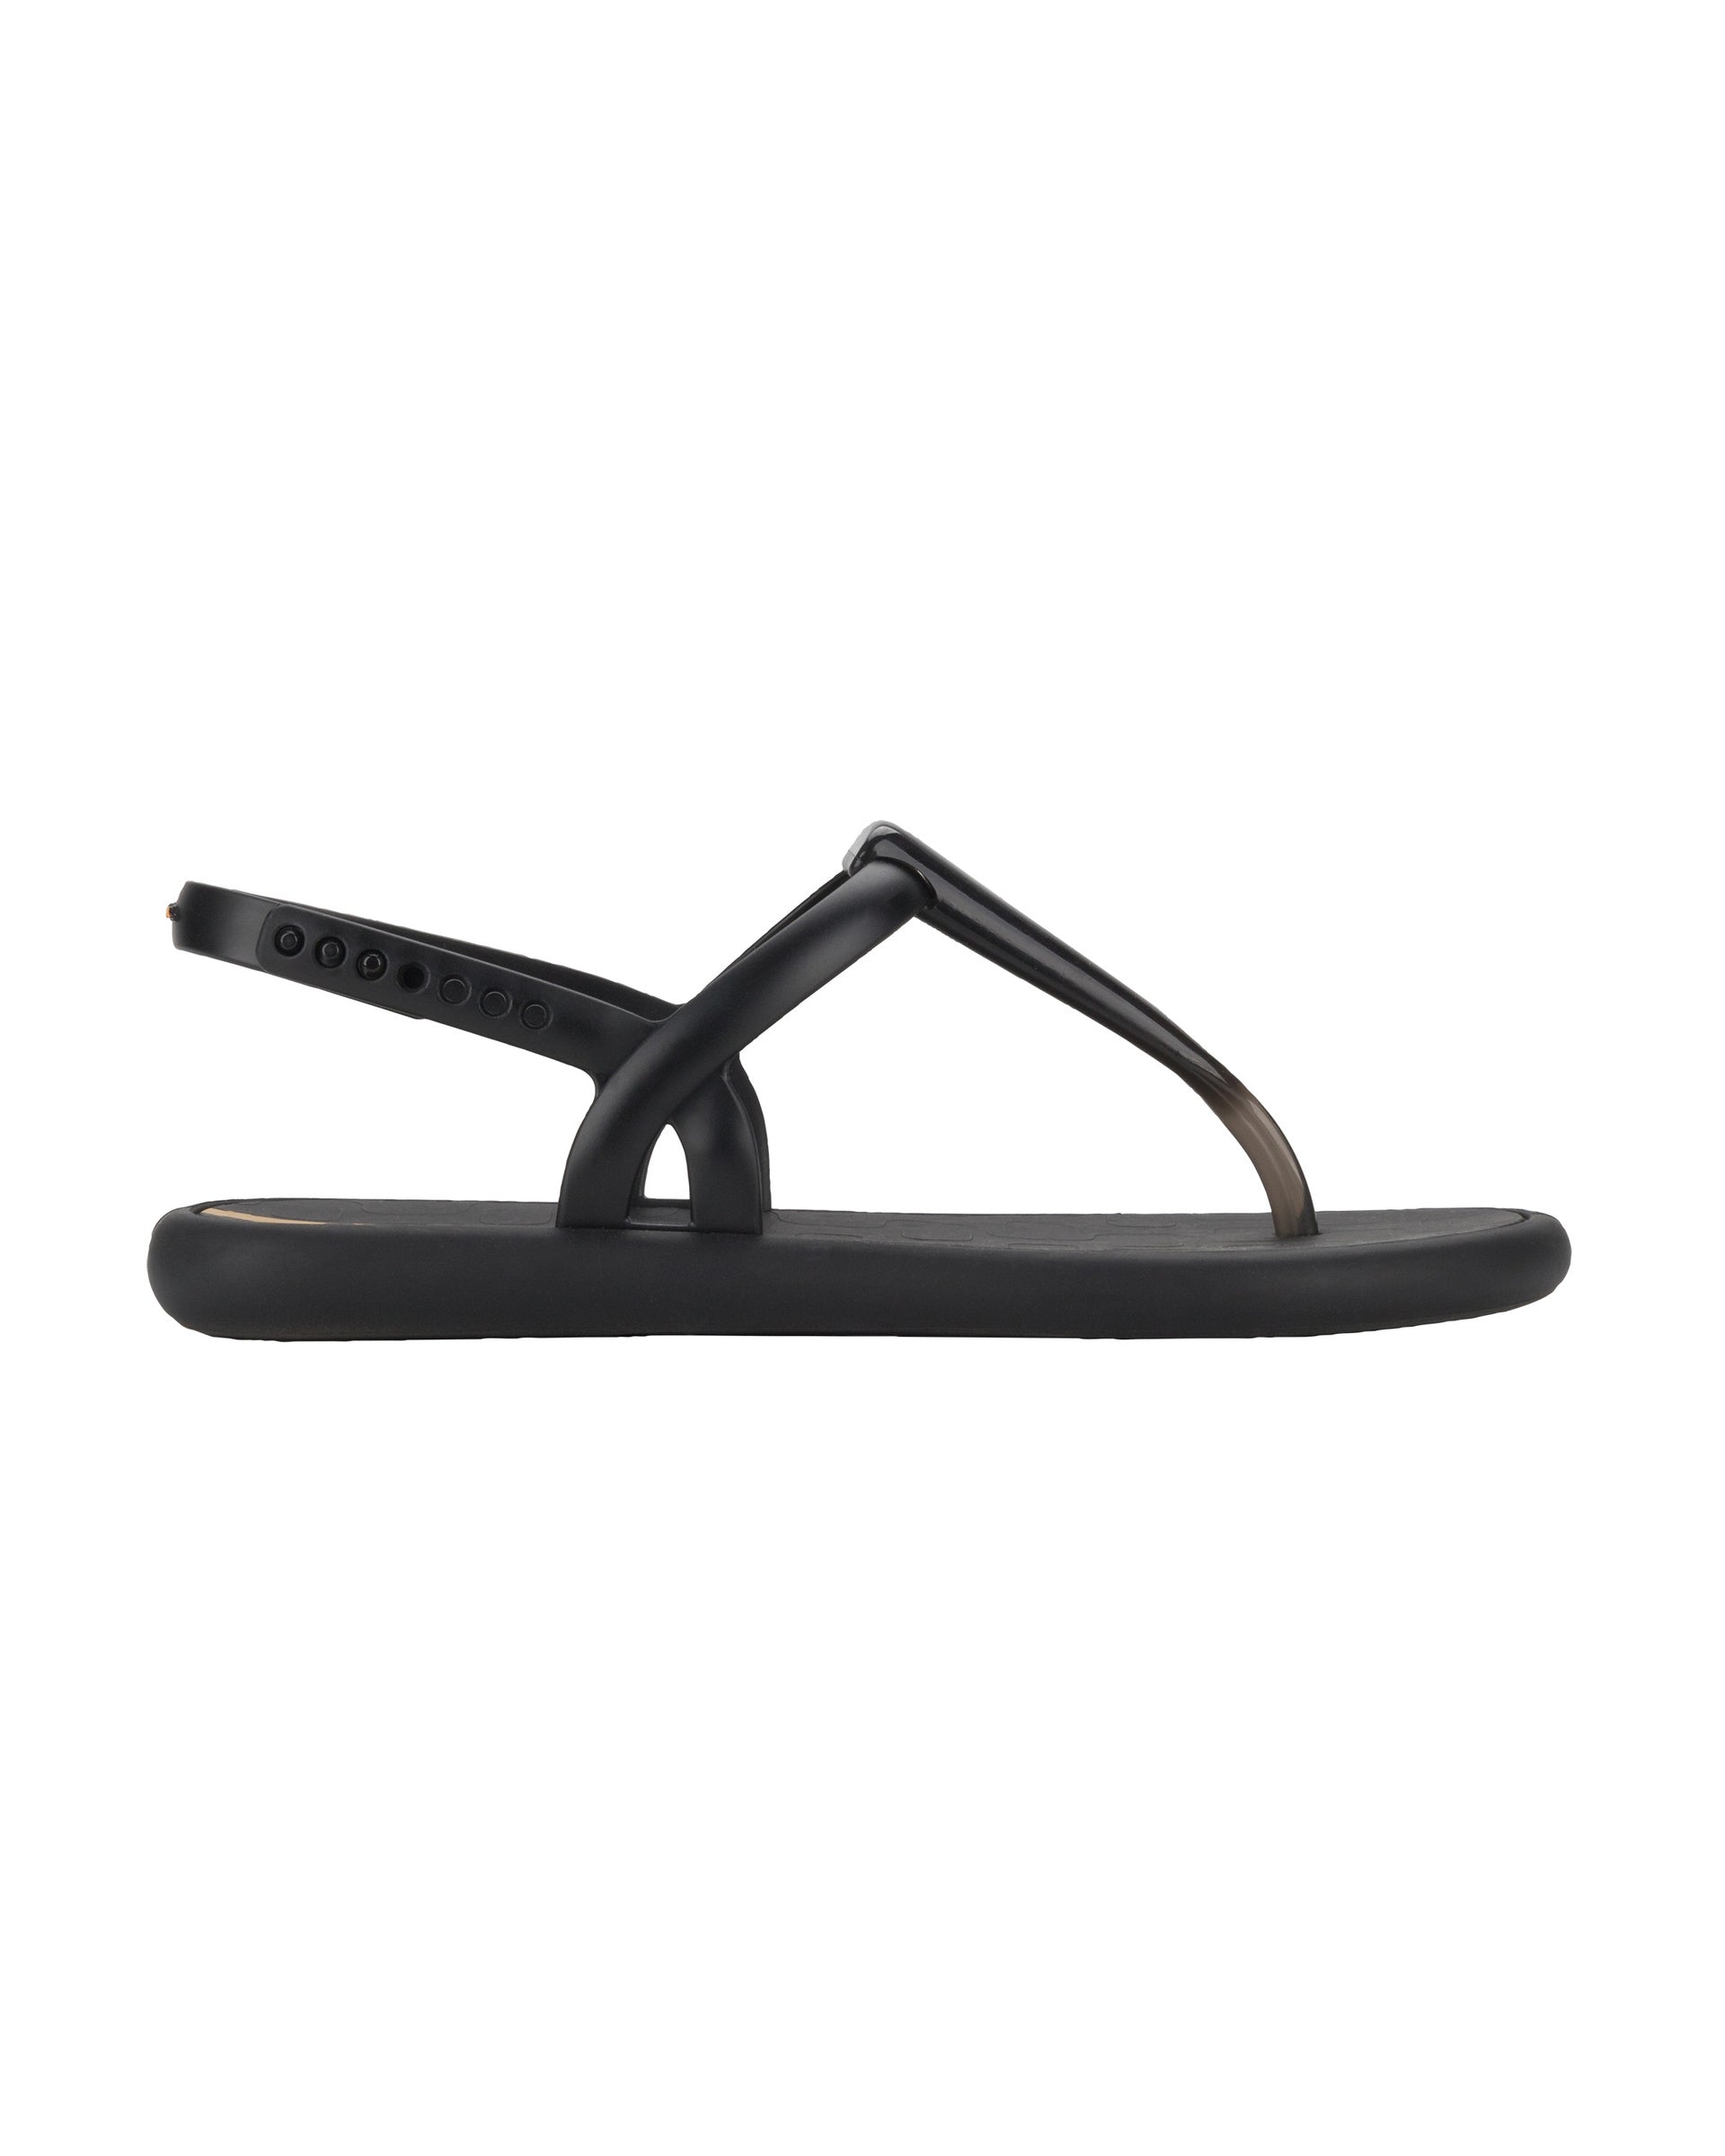 Outer side view of a black Ipanema Glossy women's t-strap sandal.